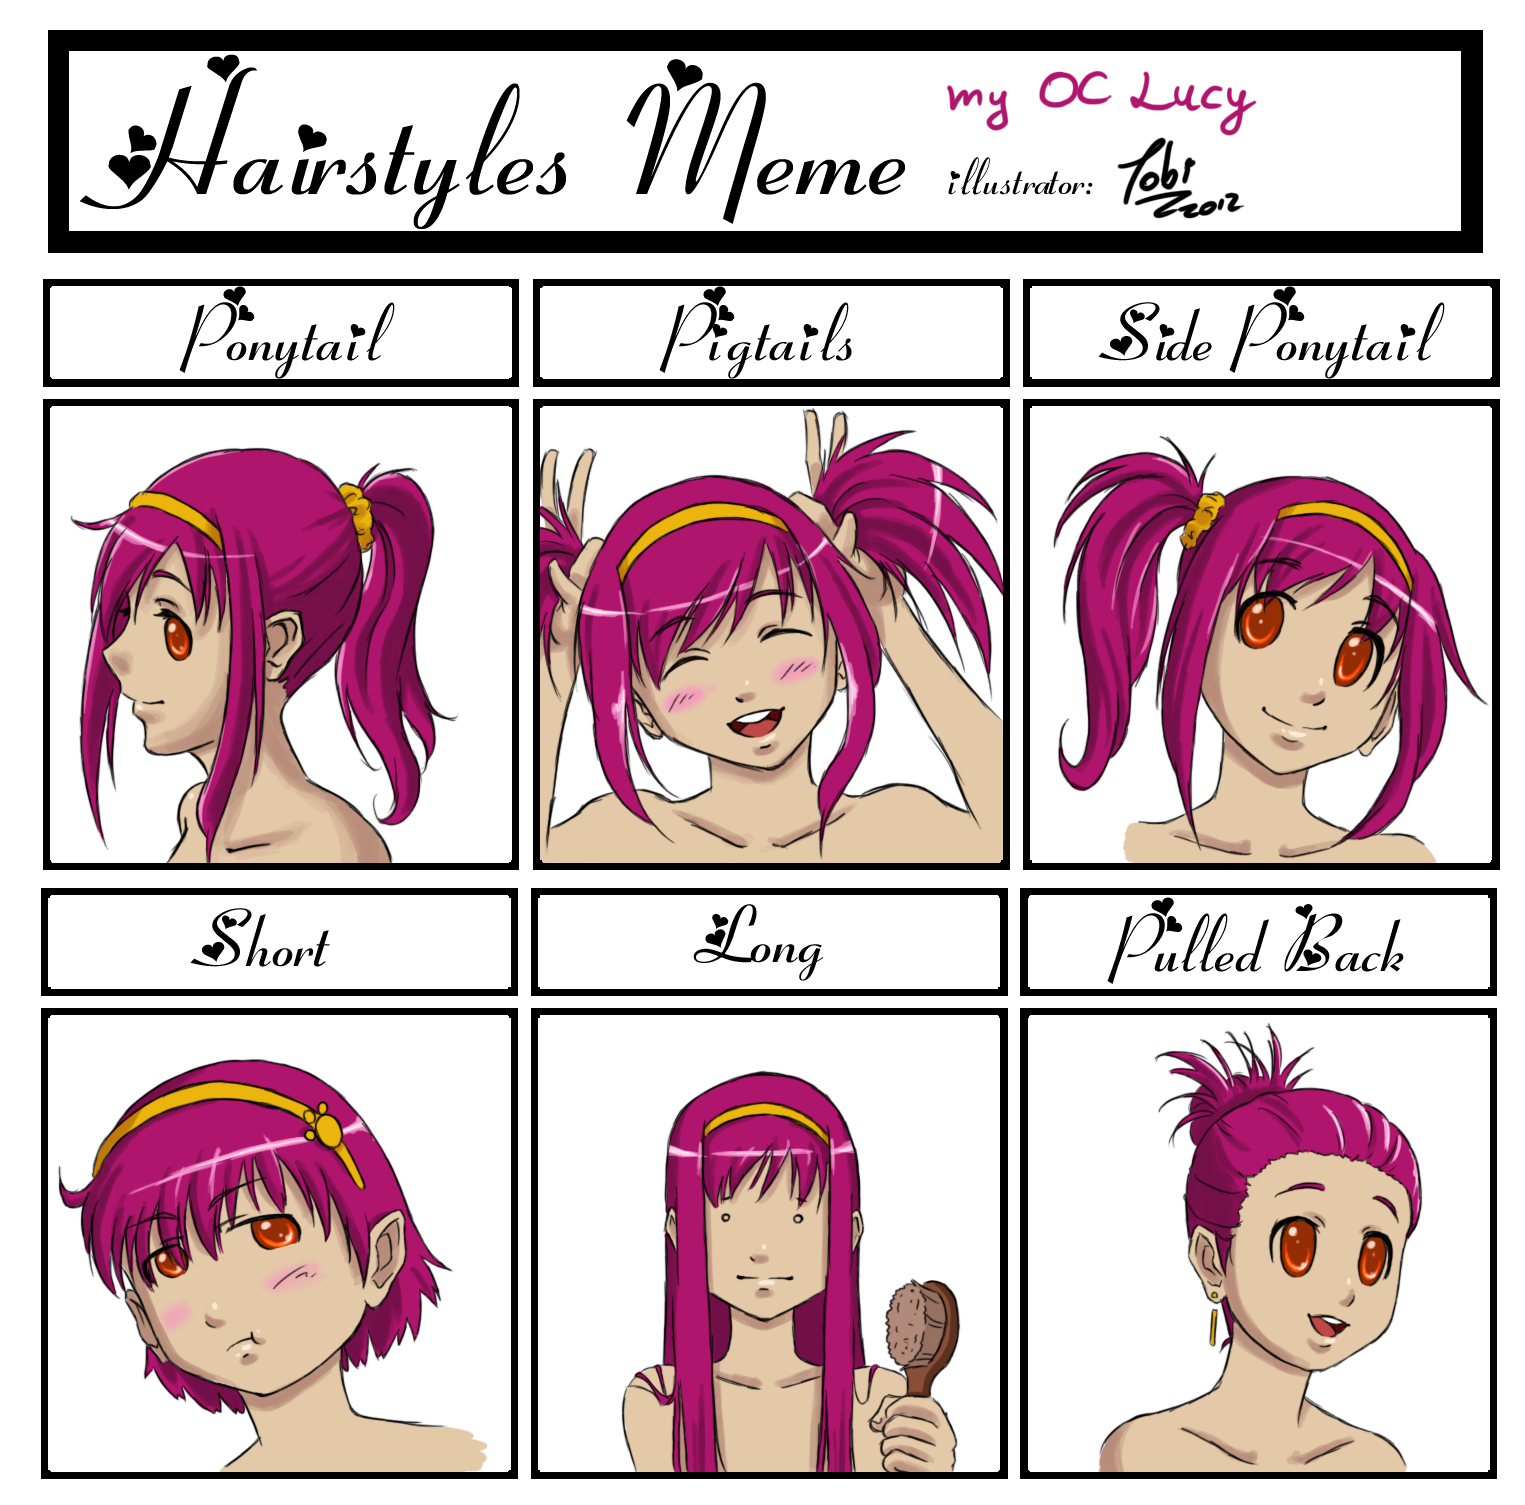 Hairstyles Meme with Lucy by Tobsen85 on DeviantArt